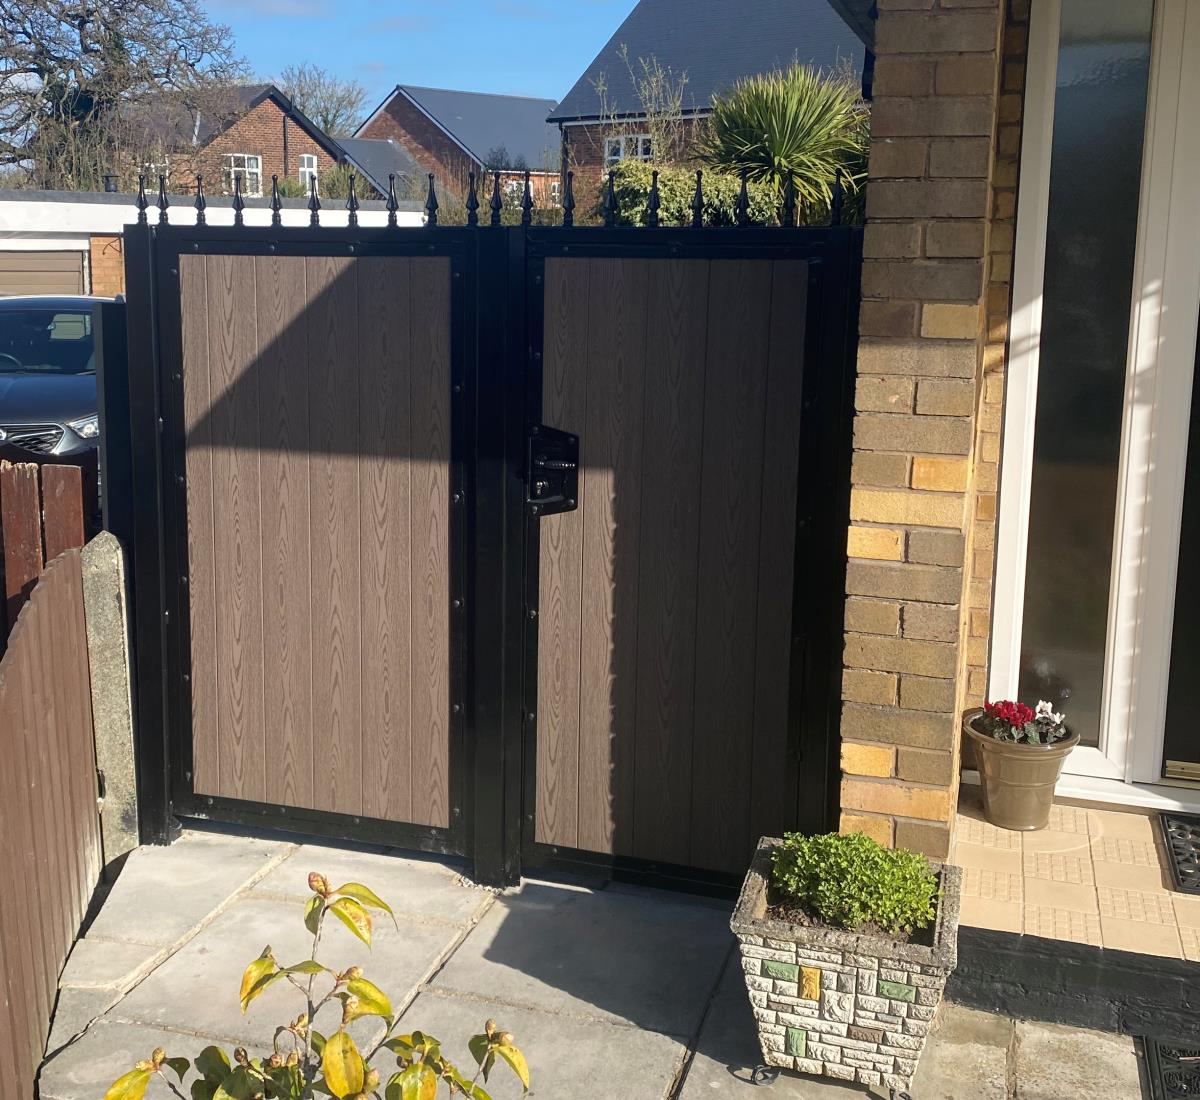 Composite side gate and panel installation to a property in Eccleston, near Chorley.